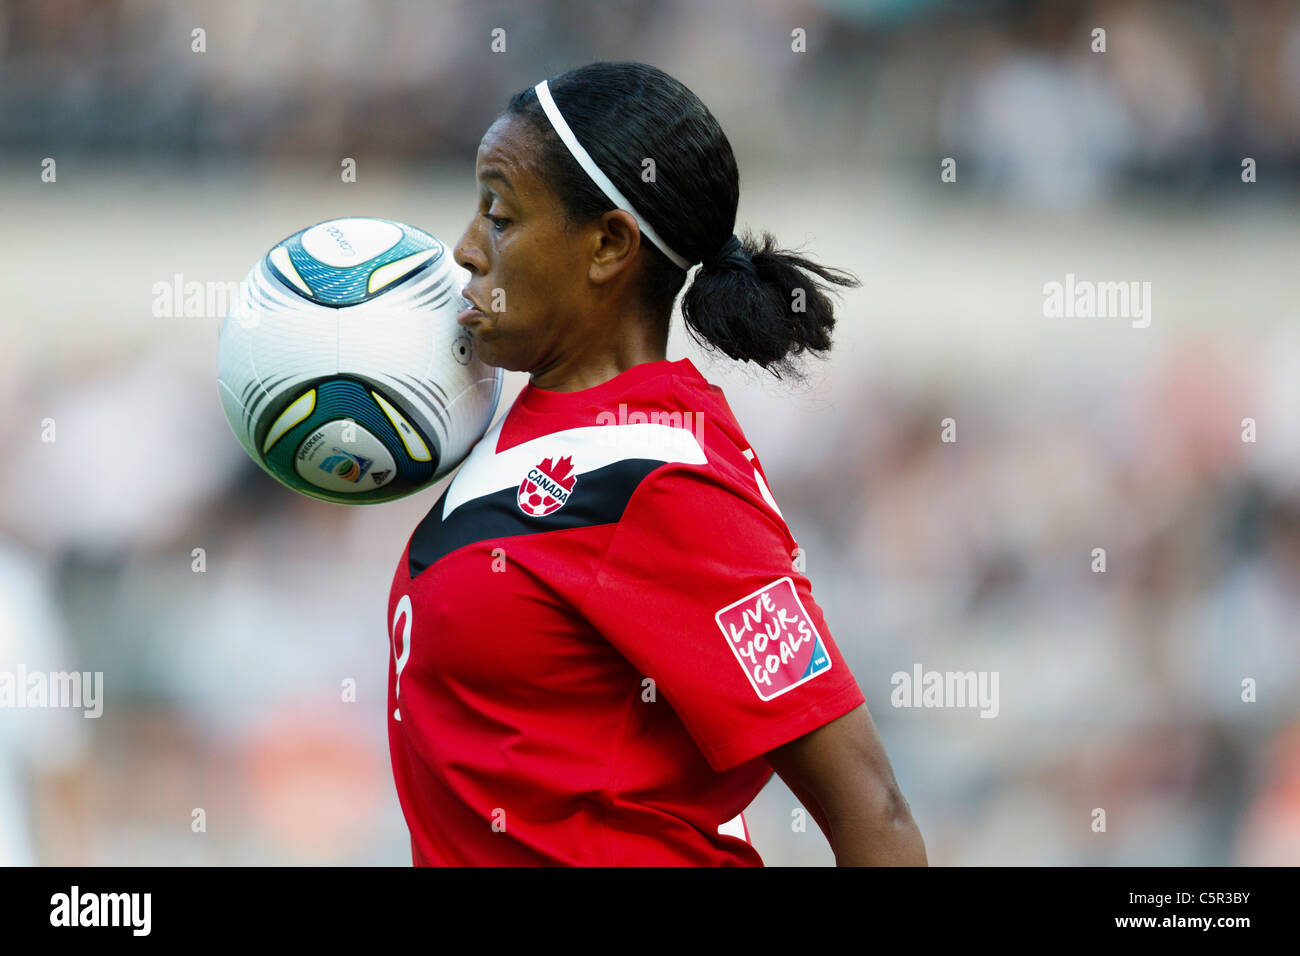 Candace Chapman of Canada brings the ball down during the opening match of the 2011 Women's World Cup soccer tournament. Stock Photo